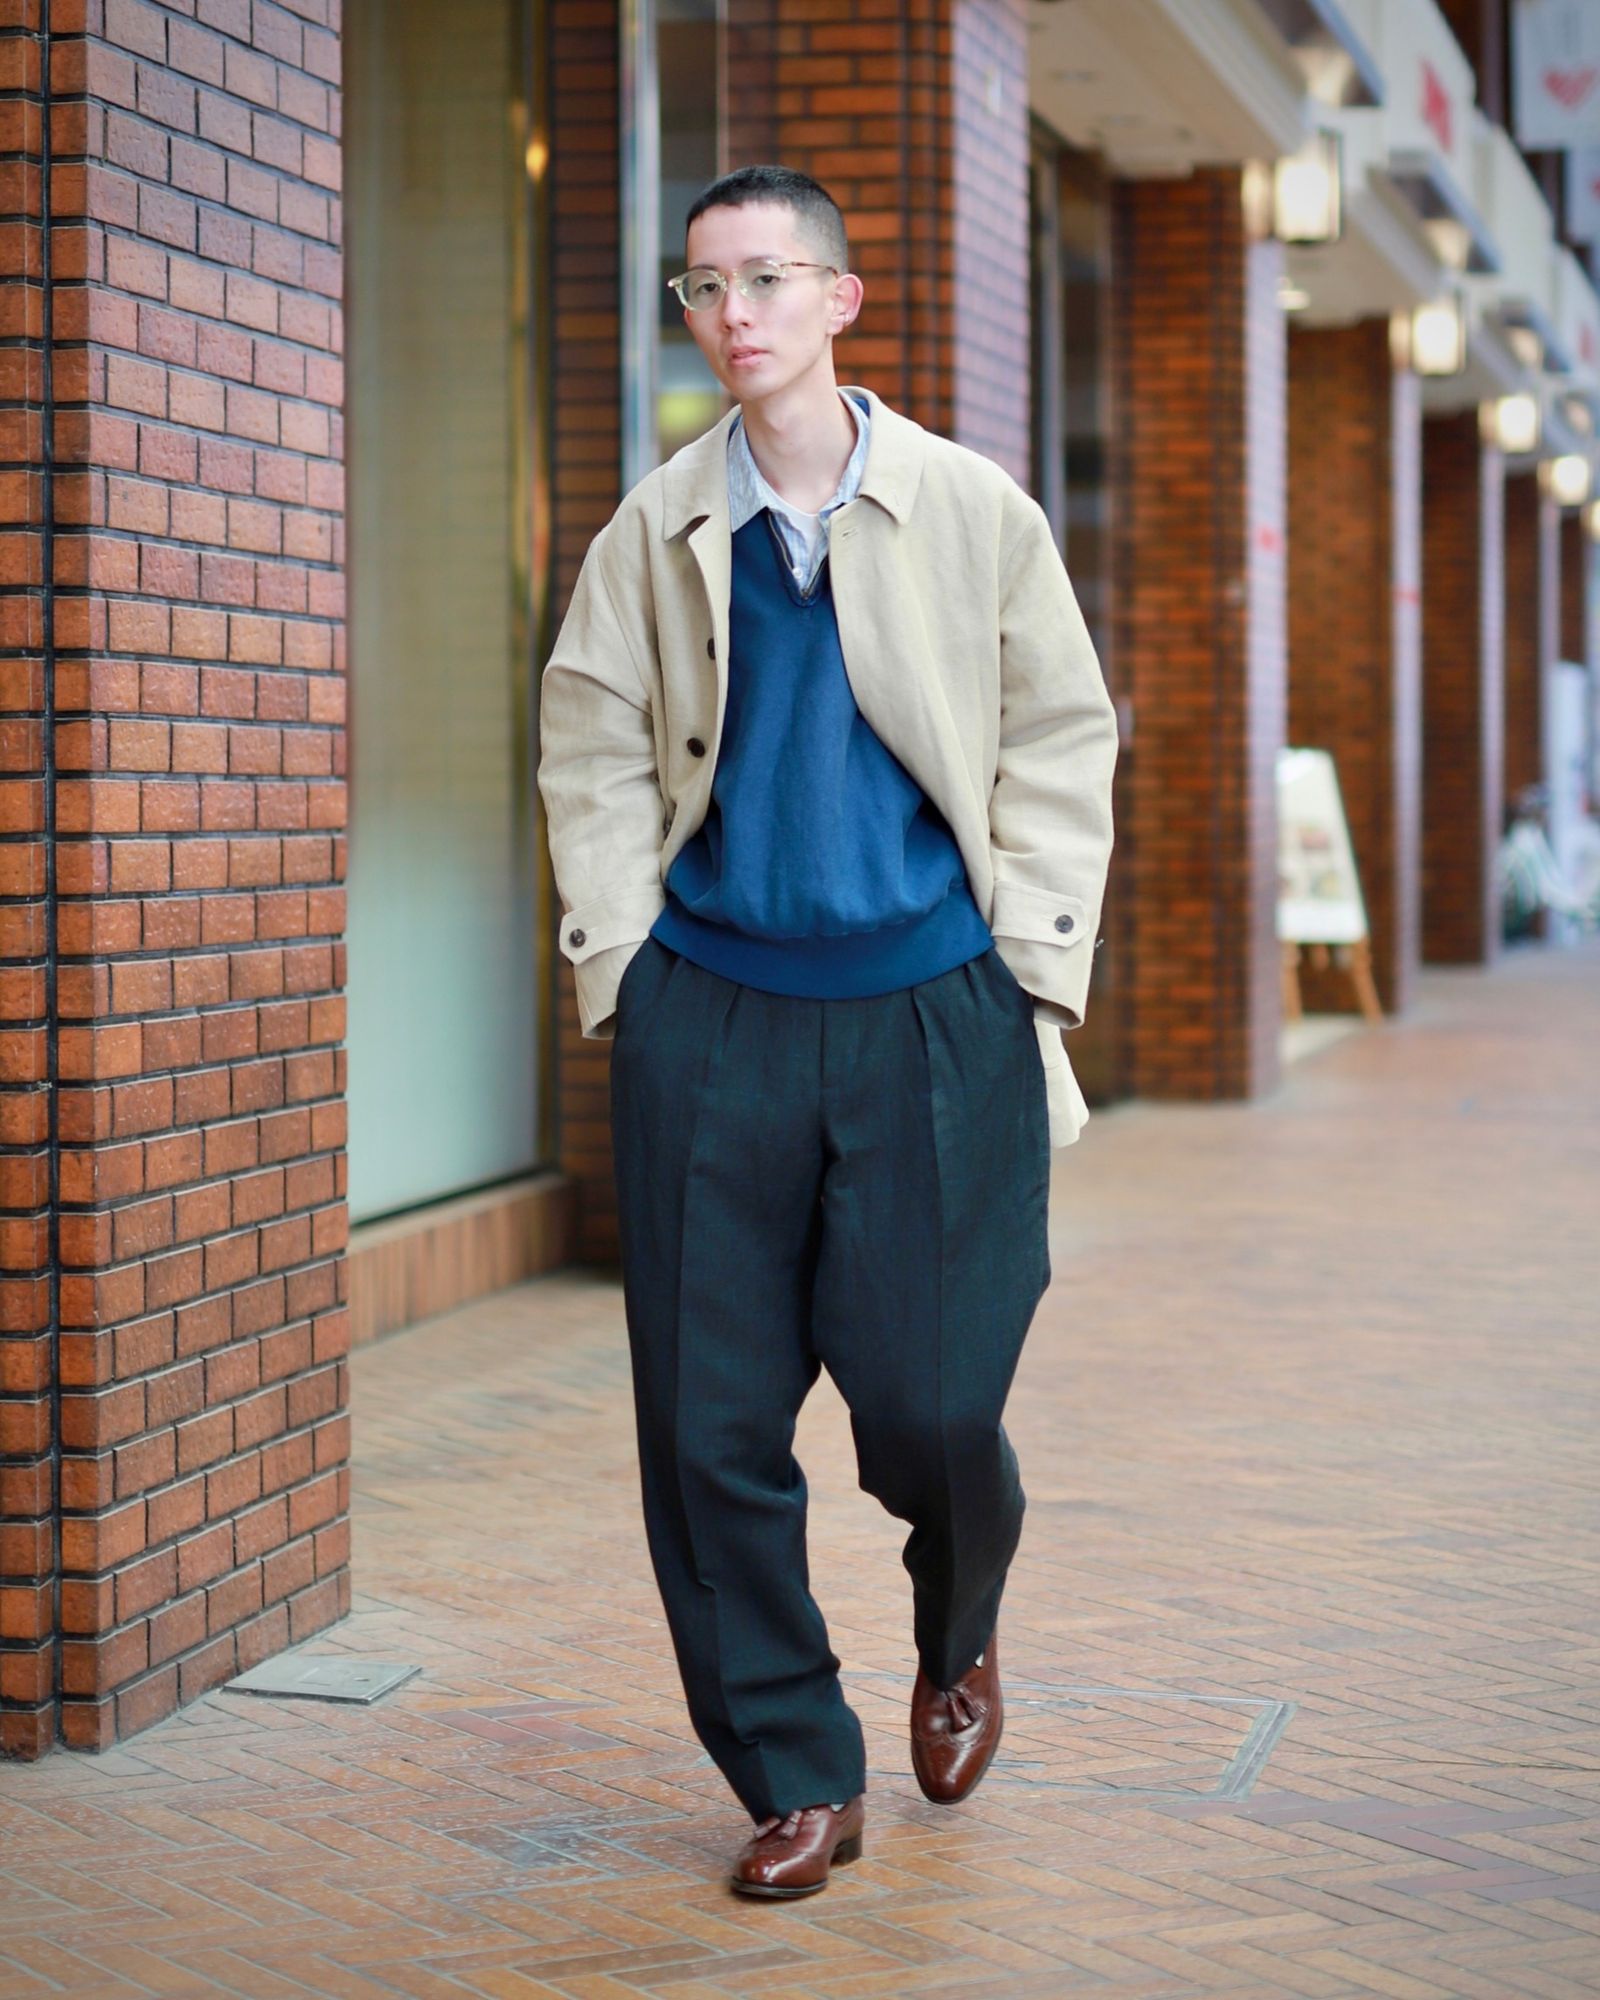 ＜A.PRESSE＞Wide Tapered Trousersです